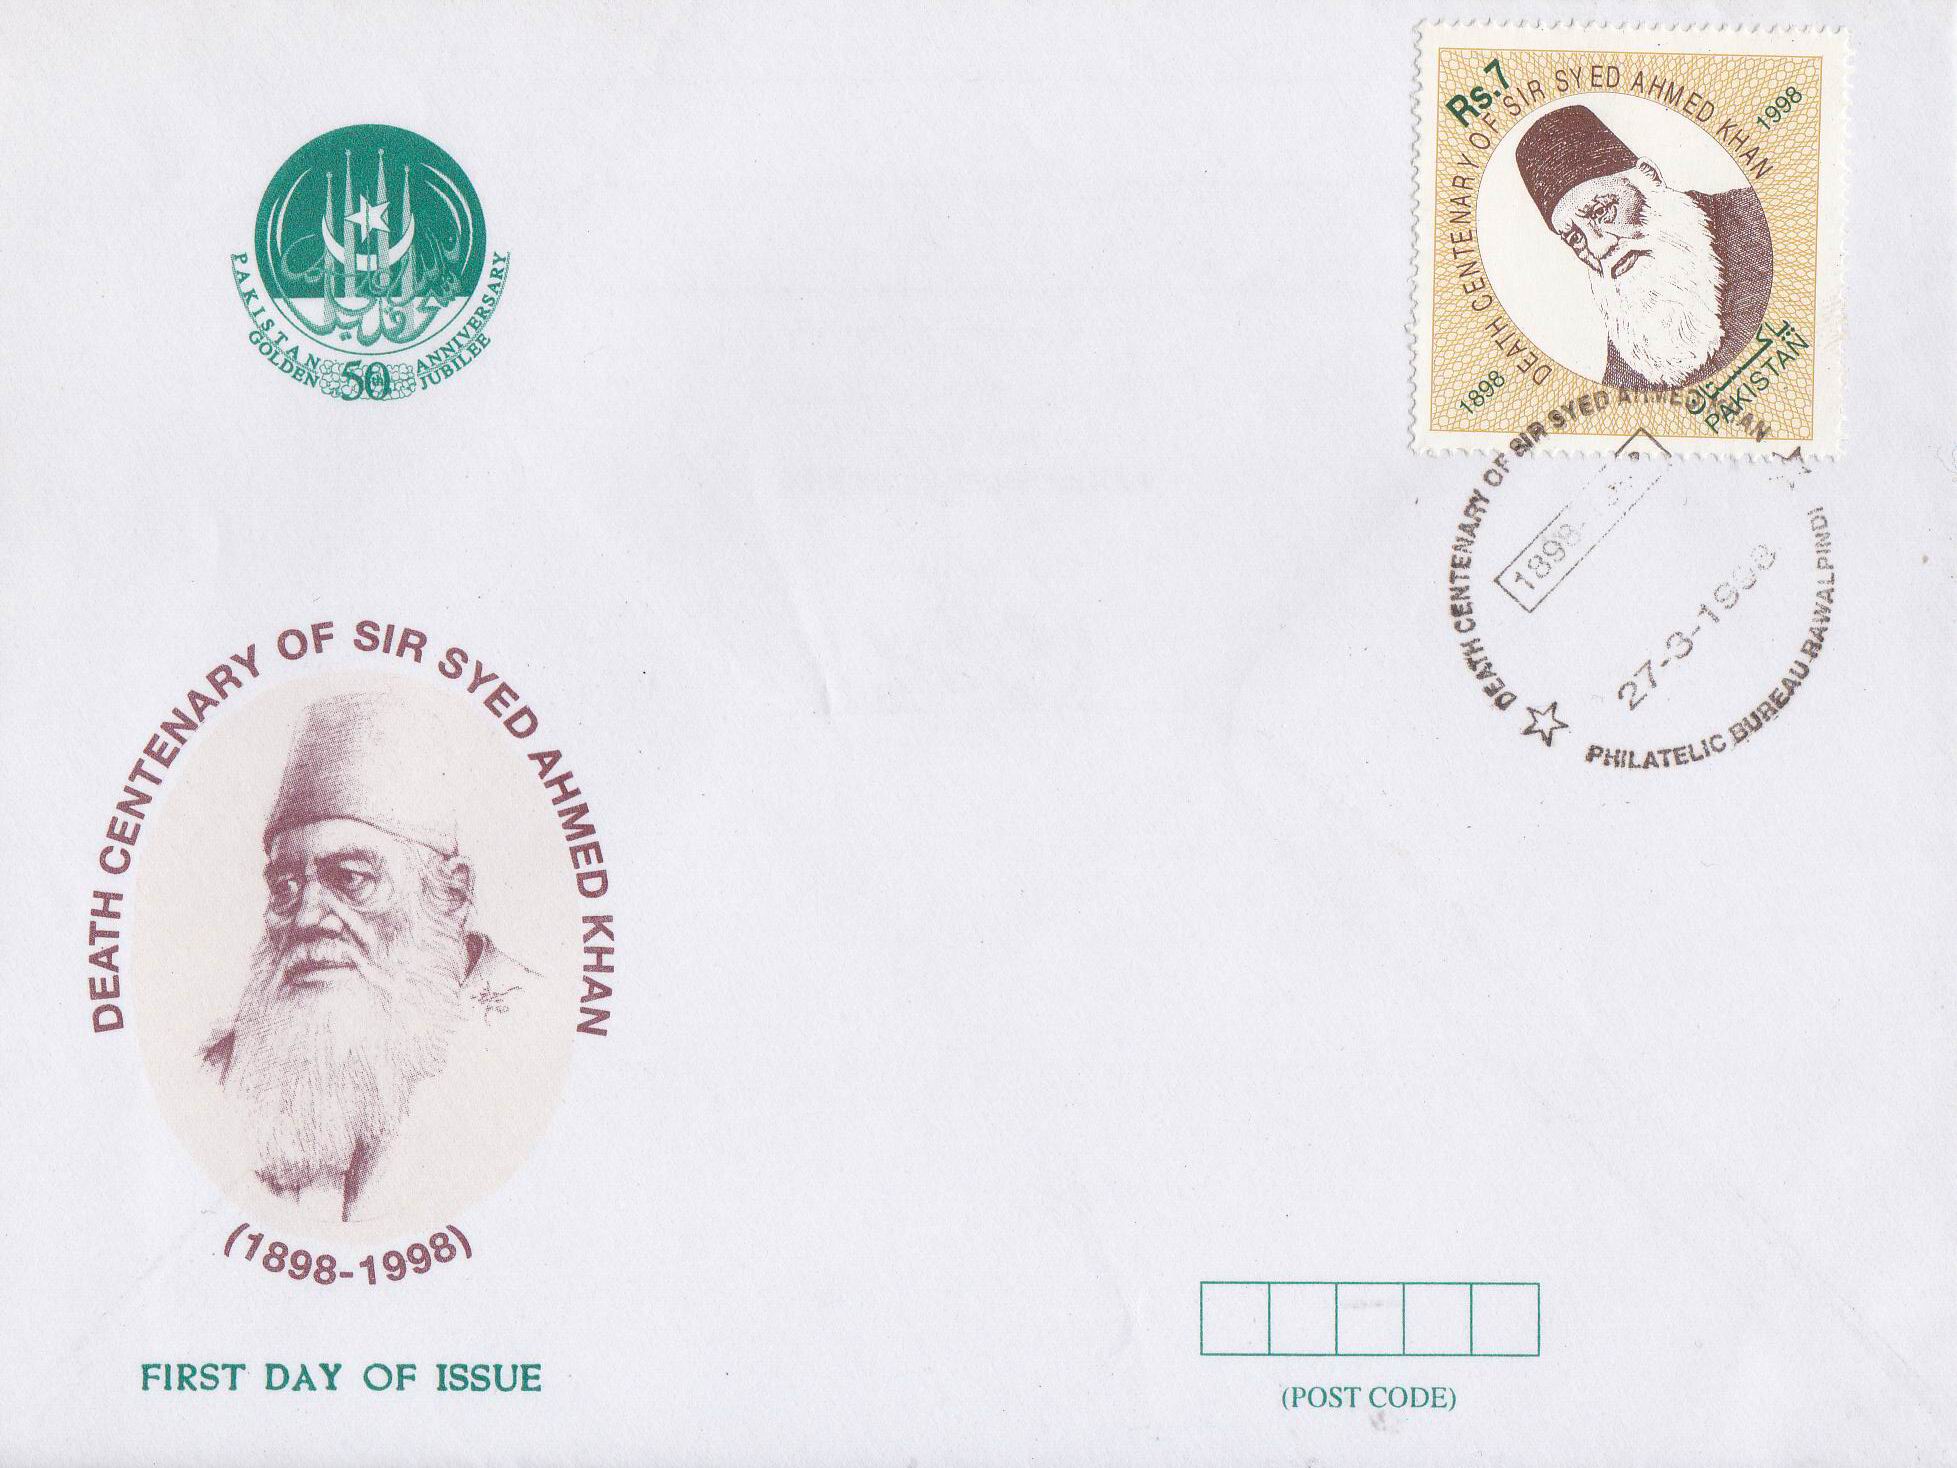 Pakistan Fdc 1998 Brochure & Stamp Sir Syed Ahmed Khan - Click Image to Close